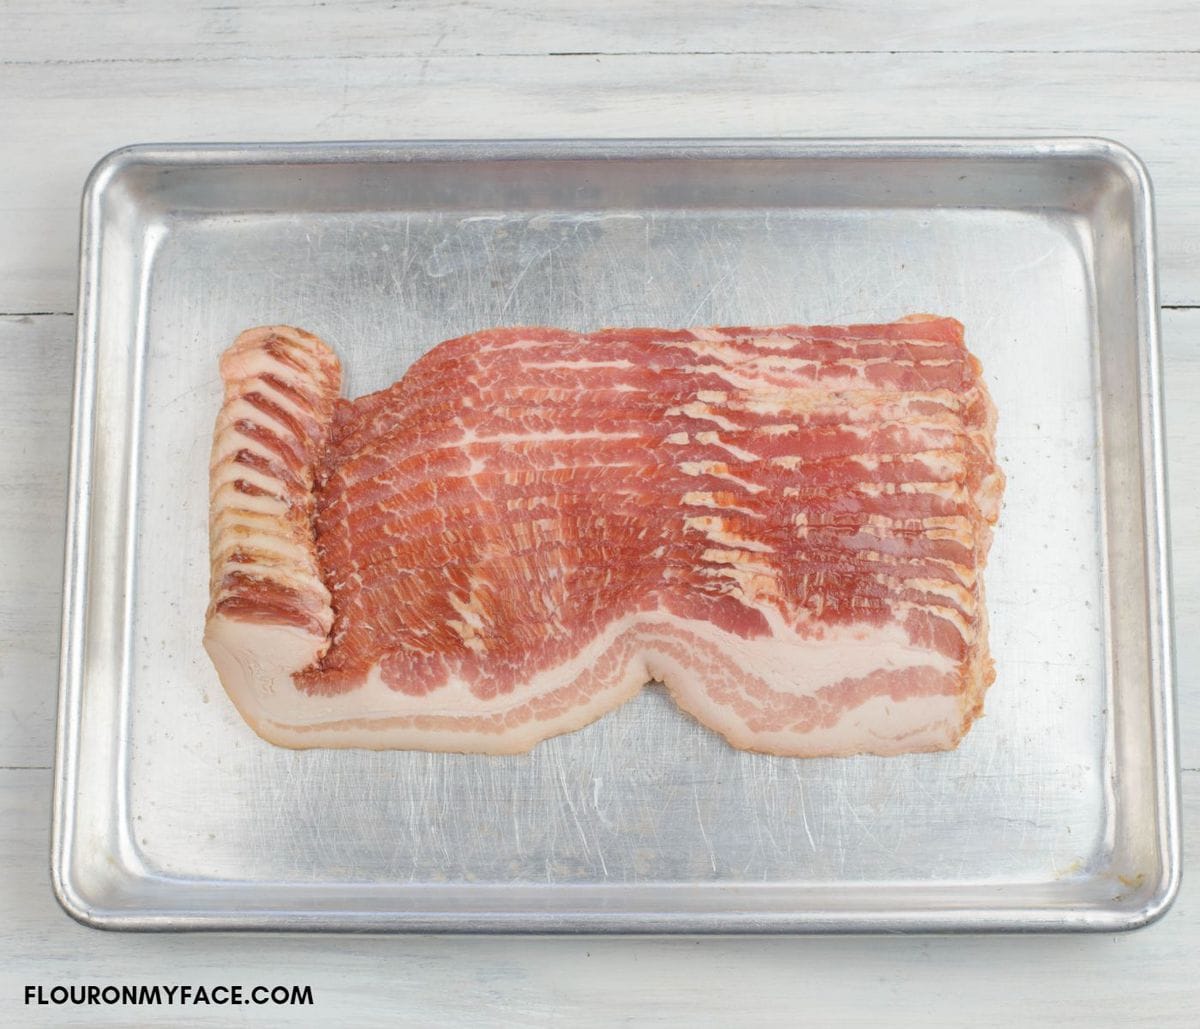 A 16 oz. package of opened bacon on a small baking sheet.